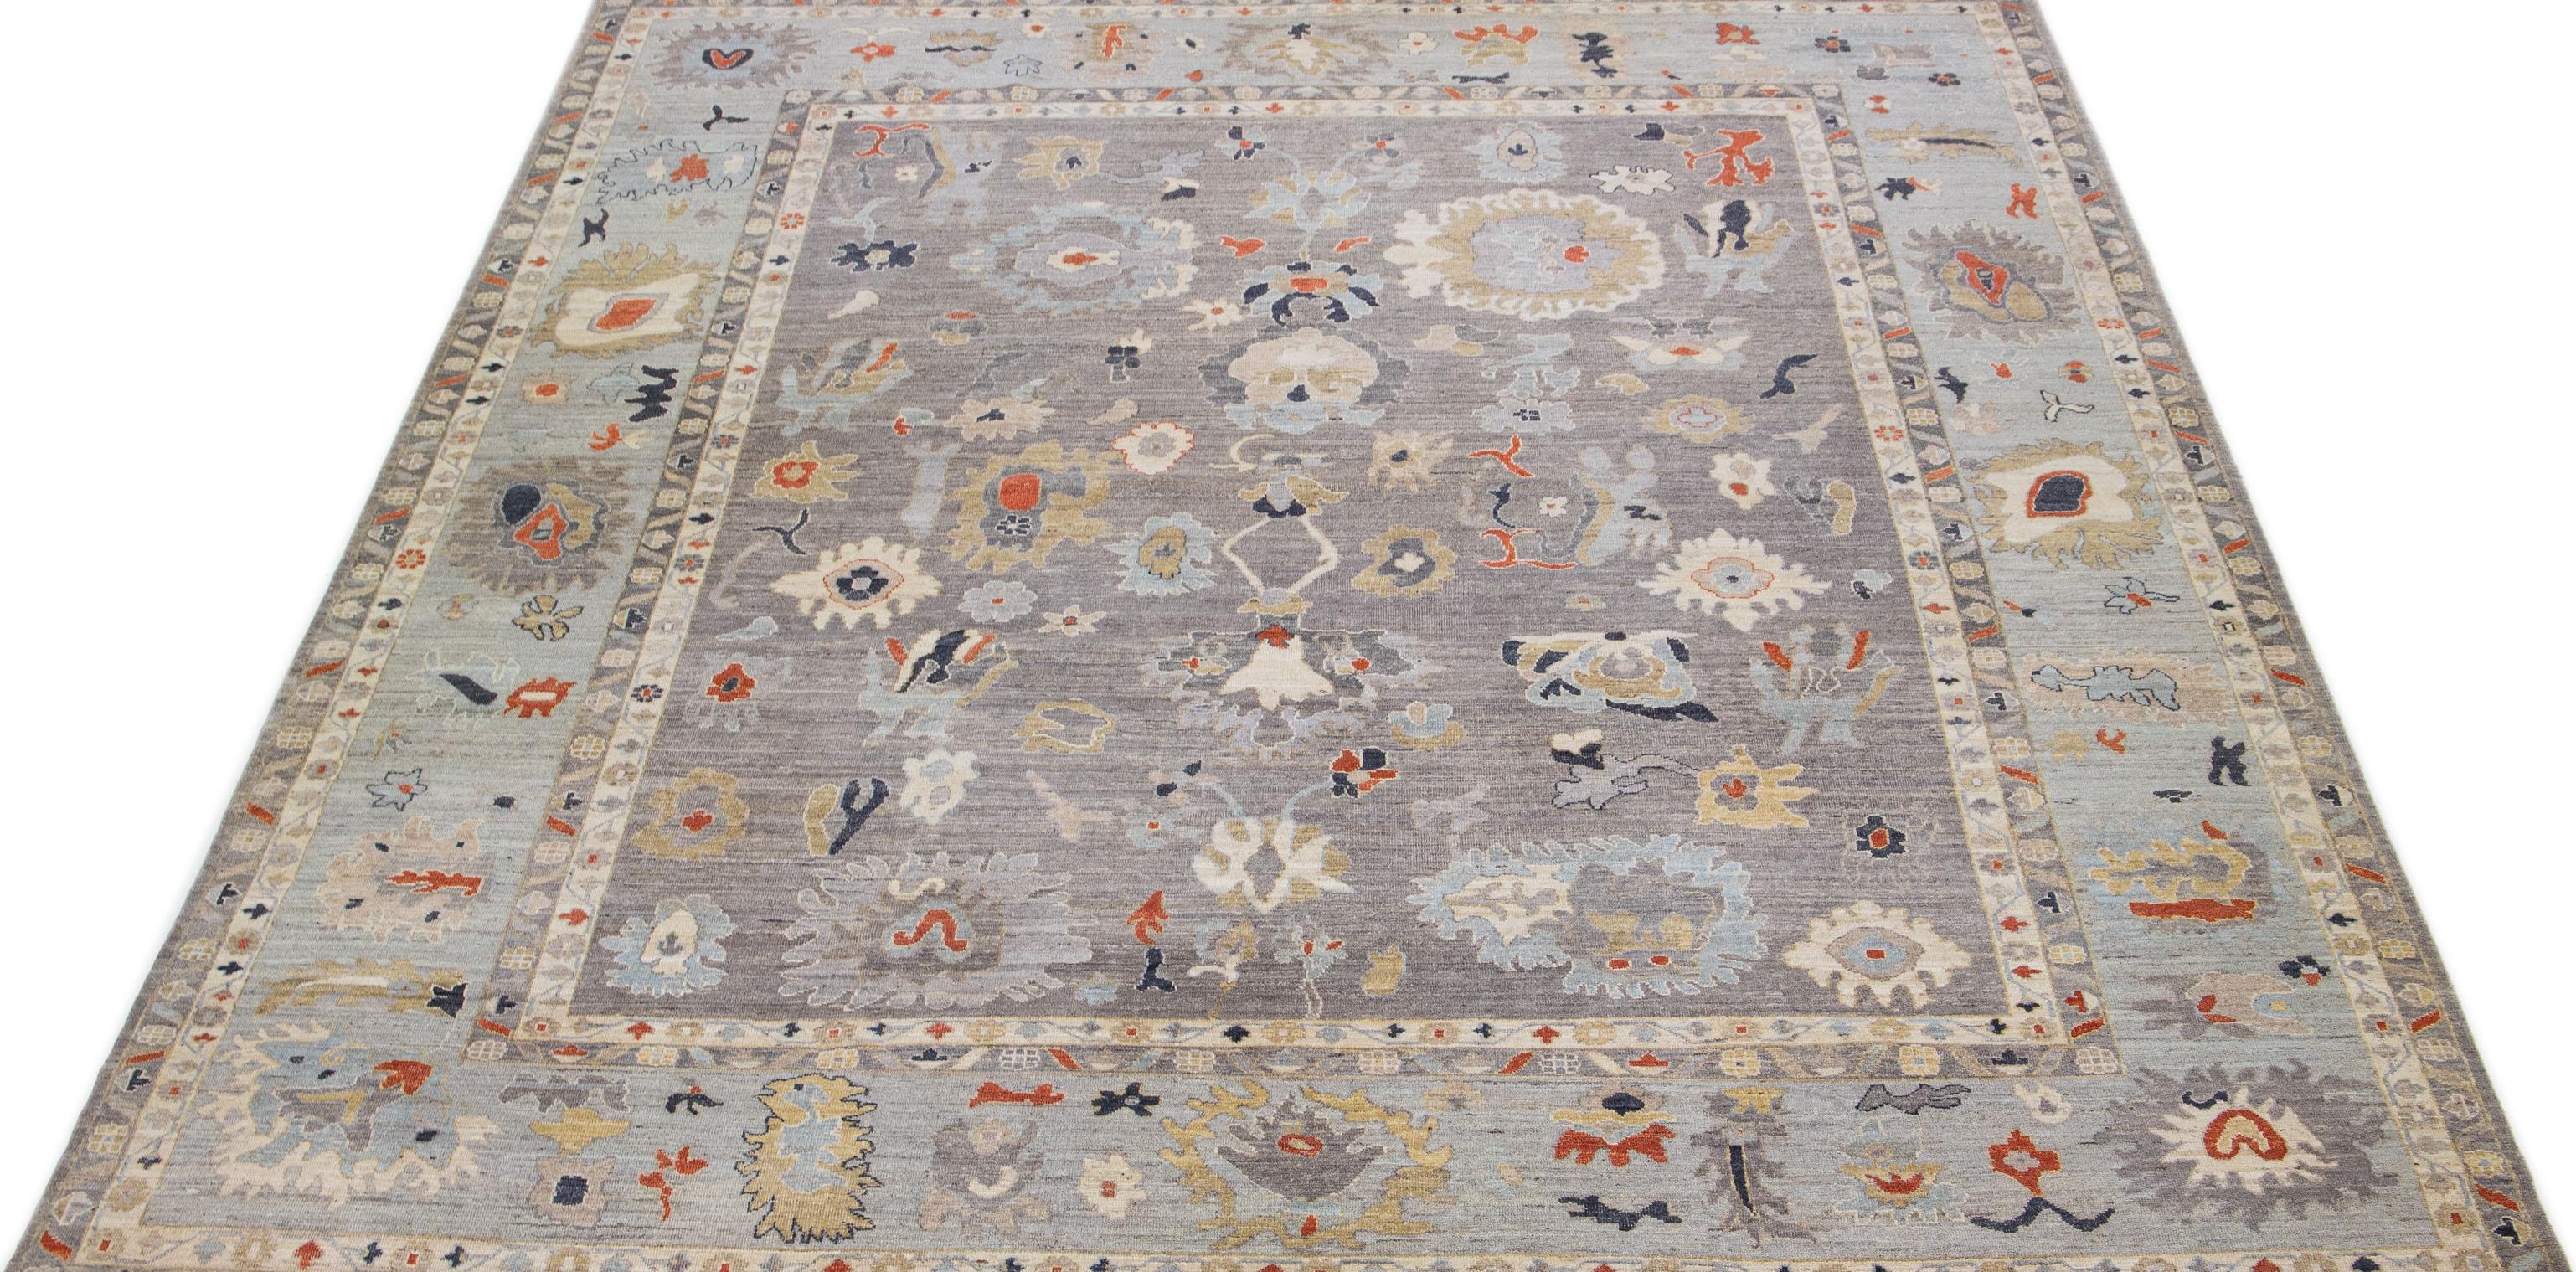 Our Gray Field Oushak style rug features an all-over floral design with handmade quality and hand knotted techniques. Made with 100% wool, this Indian rug features rust, beige, and blue accents for a touch of color.

This rug measures 11'11